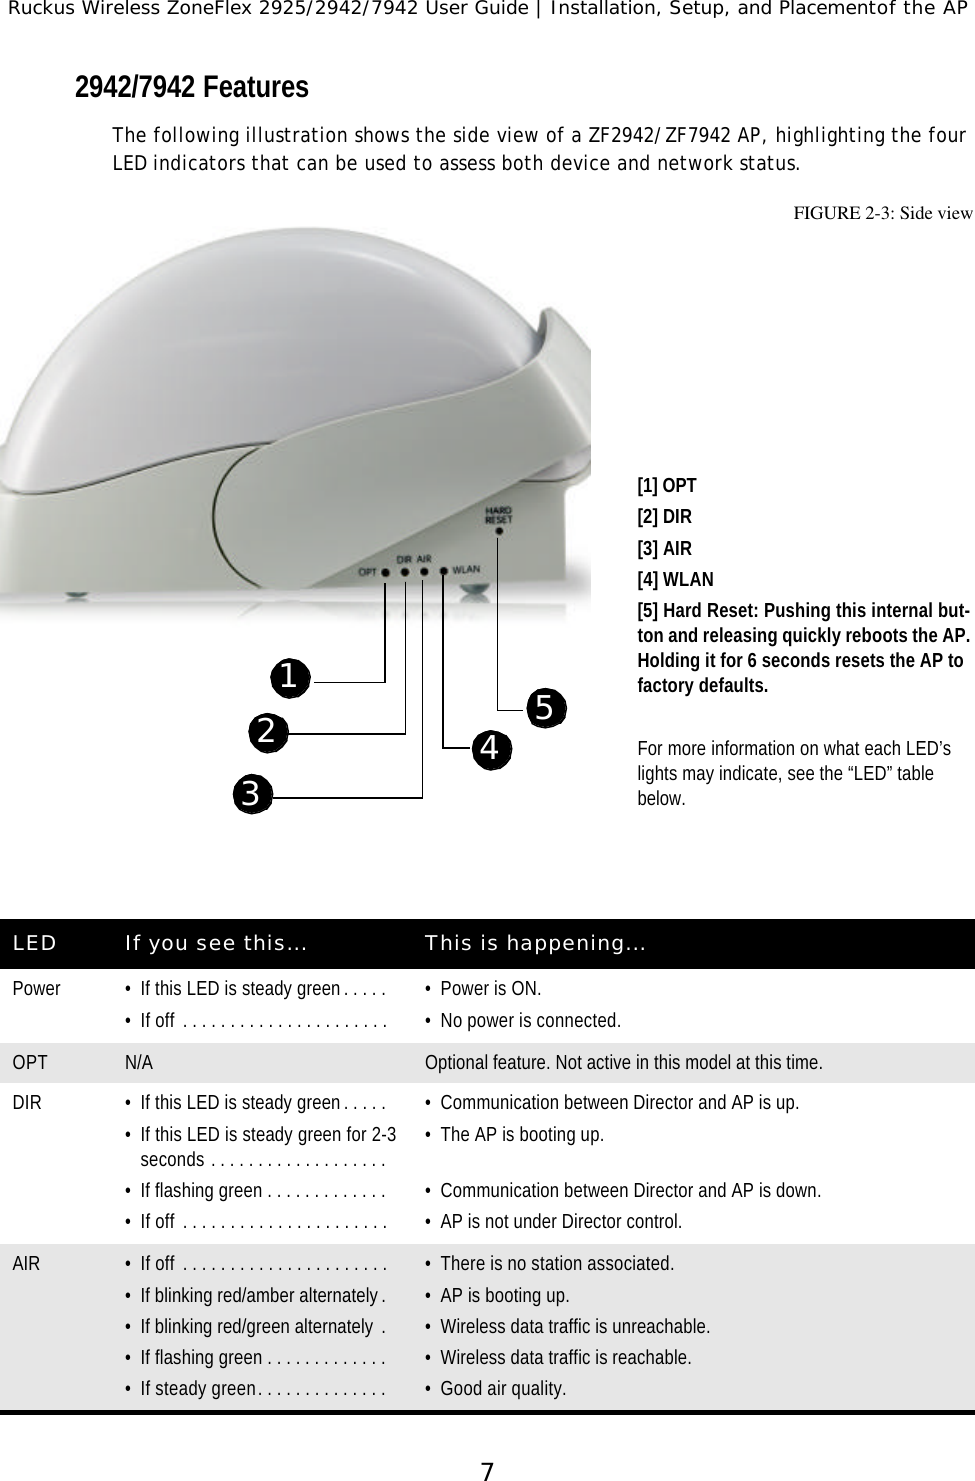 Ruckus Wireless ZoneFlex 2925/2942/7942 User Guide | Installation, Setup, and Placementof the AP72942/7942 FeaturesThe following illustration shows the side view of a ZF2942/ZF7942 AP, highlighting the four LED indicators that can be used to assess both device and network status.  FIGURE 2-3: Side view[1] OPT[2] DIR[3] AIR[4] WLAN[5] Hard Reset: Pushing this internal but-ton and releasing quickly reboots the AP. Holding it for 6 seconds resets the AP to factory defaults.For more information on what each LED’s lights may indicate, see the “LED” table below.LED If you see this... This is happening...Power •If this LED is steady green . . . . . •If off  . . . . . . . . . . . . . . . . . . . . . . •Power is ON.•No power is connected.OPT N/A Optional feature. Not active in this model at this time.DIR •If this LED is steady green . . . . . •If this LED is steady green for 2-3 seconds . . . . . . . . . . . . . . . . . . . •If flashing green . . . . . . . . . . . . . •If off  . . . . . . . . . . . . . . . . . . . . . . •Communication between Director and AP is up.•The AP is booting up.•Communication between Director and AP is down.•AP is not under Director control.AIR •If off  . . . . . . . . . . . . . . . . . . . . . . •If blinking red/amber alternately . •If blinking red/green alternately  . •If flashing green . . . . . . . . . . . . . •If steady green . . . . . . . . . . . . . . •There is no station associated.•AP is booting up.•Wireless data traffic is unreachable.•Wireless data traffic is reachable.•Good air quality.12345